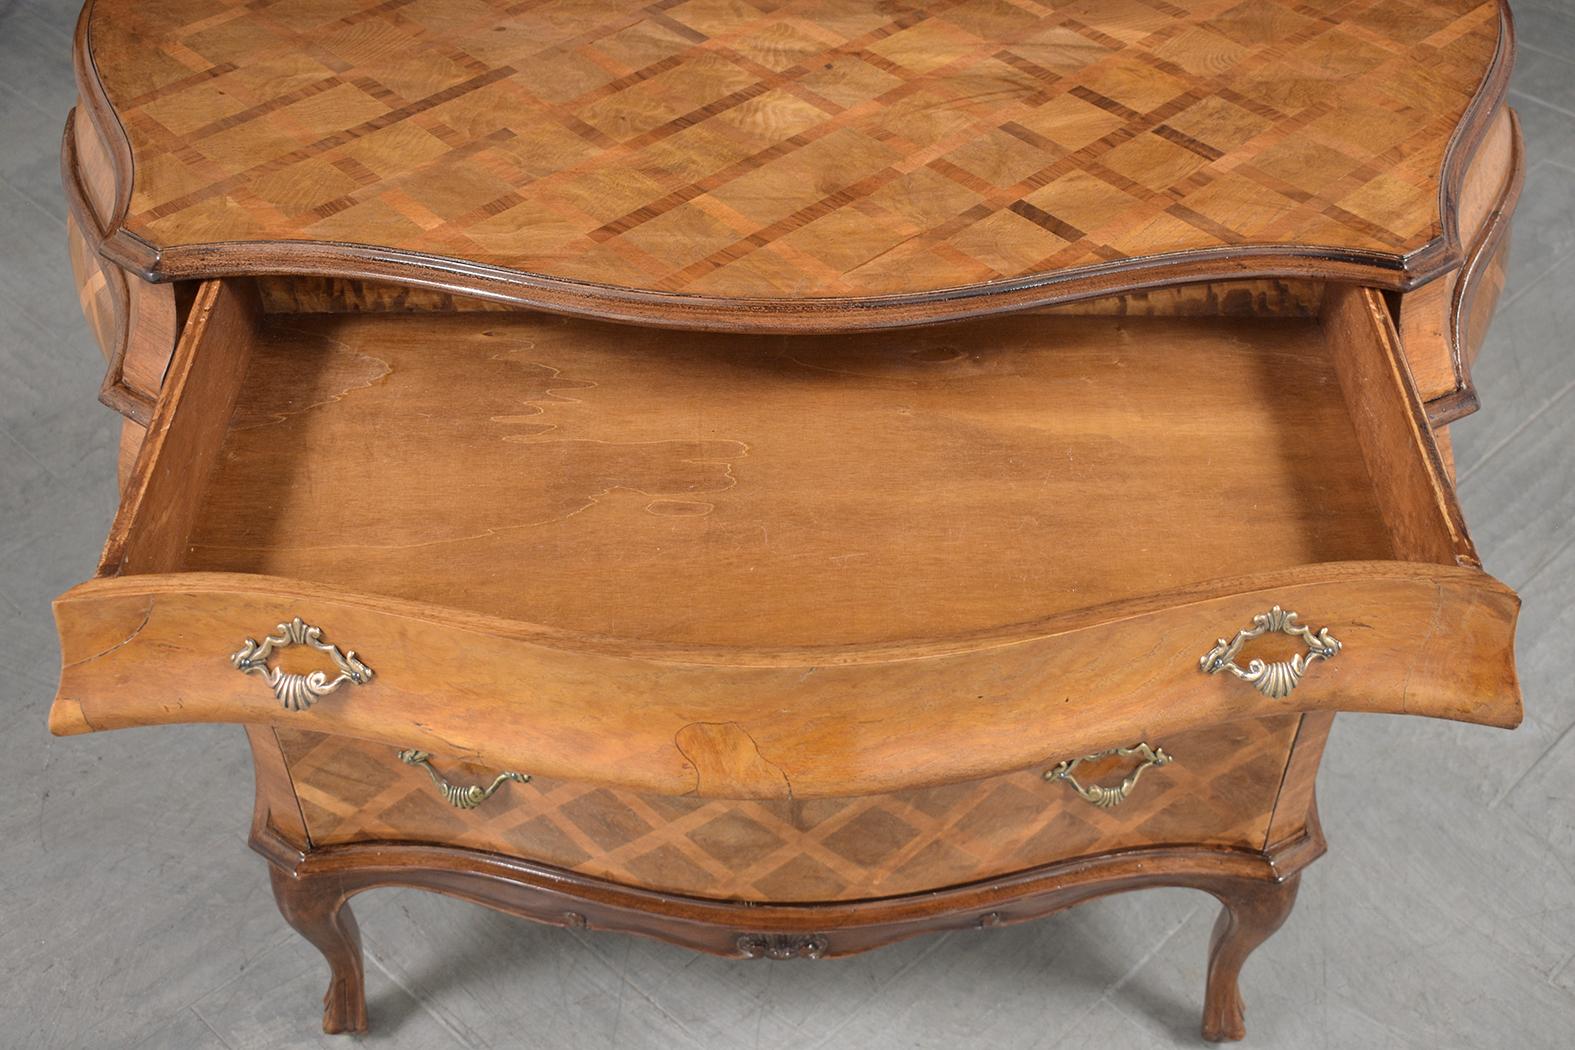 Italian Vintage Commode: Restored Wood and Marquetry Veneer Bombay Chest 3